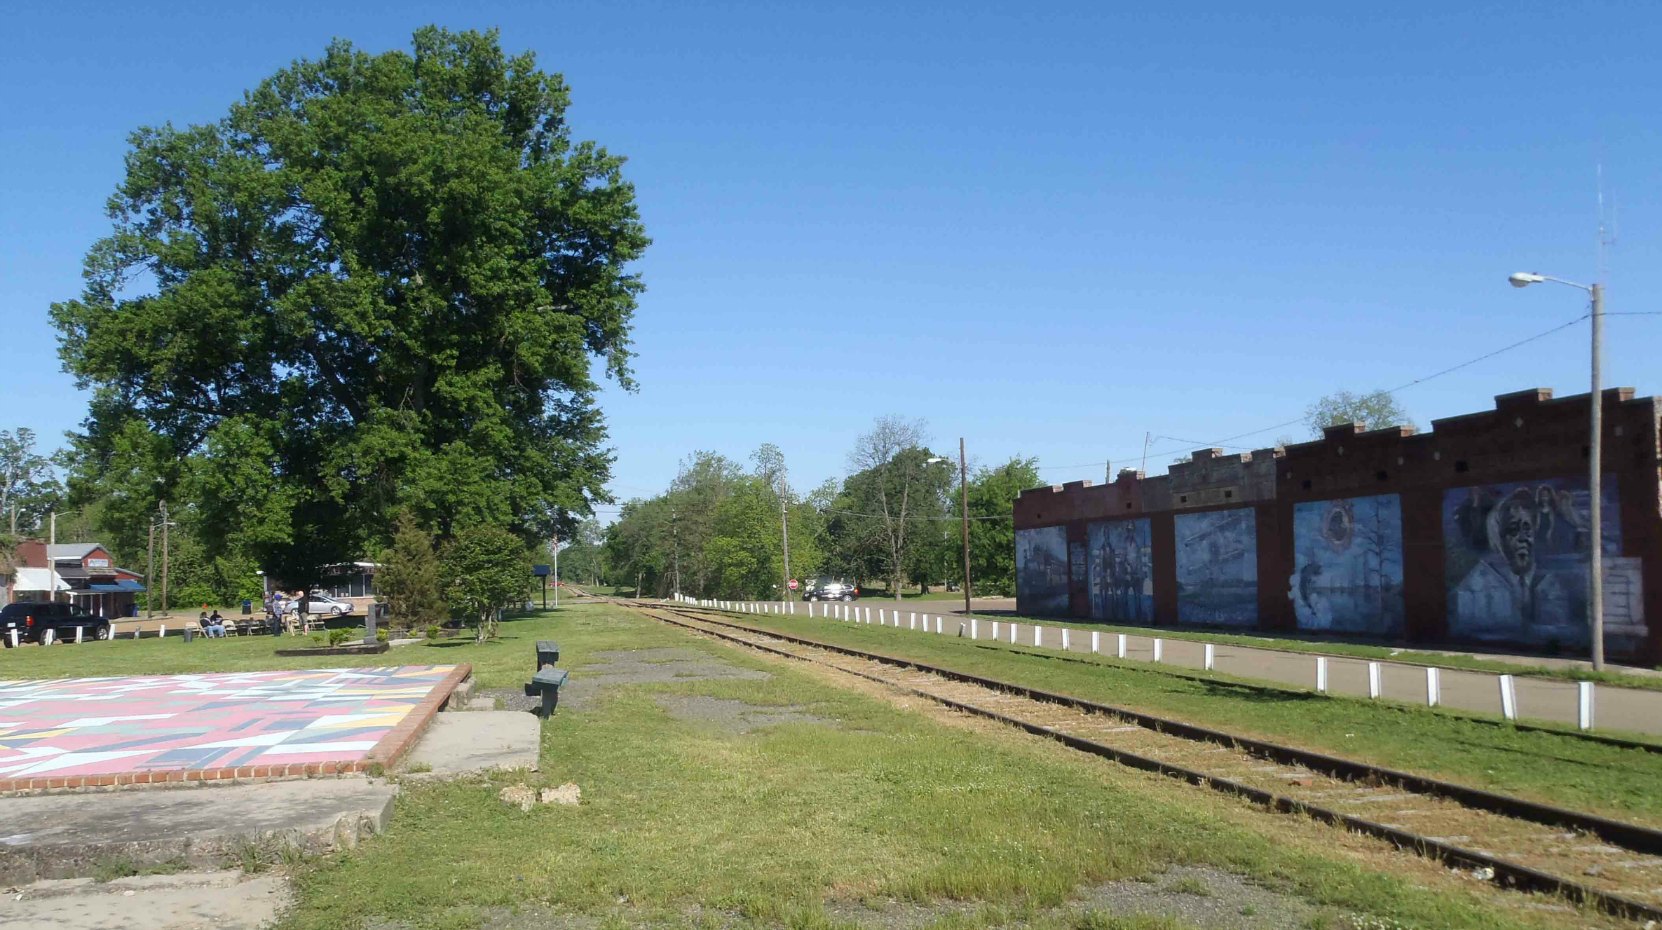 The remains of the former Tutwiler train station where W.C. Handy encountered the blues, Tutwiler, Mississippi